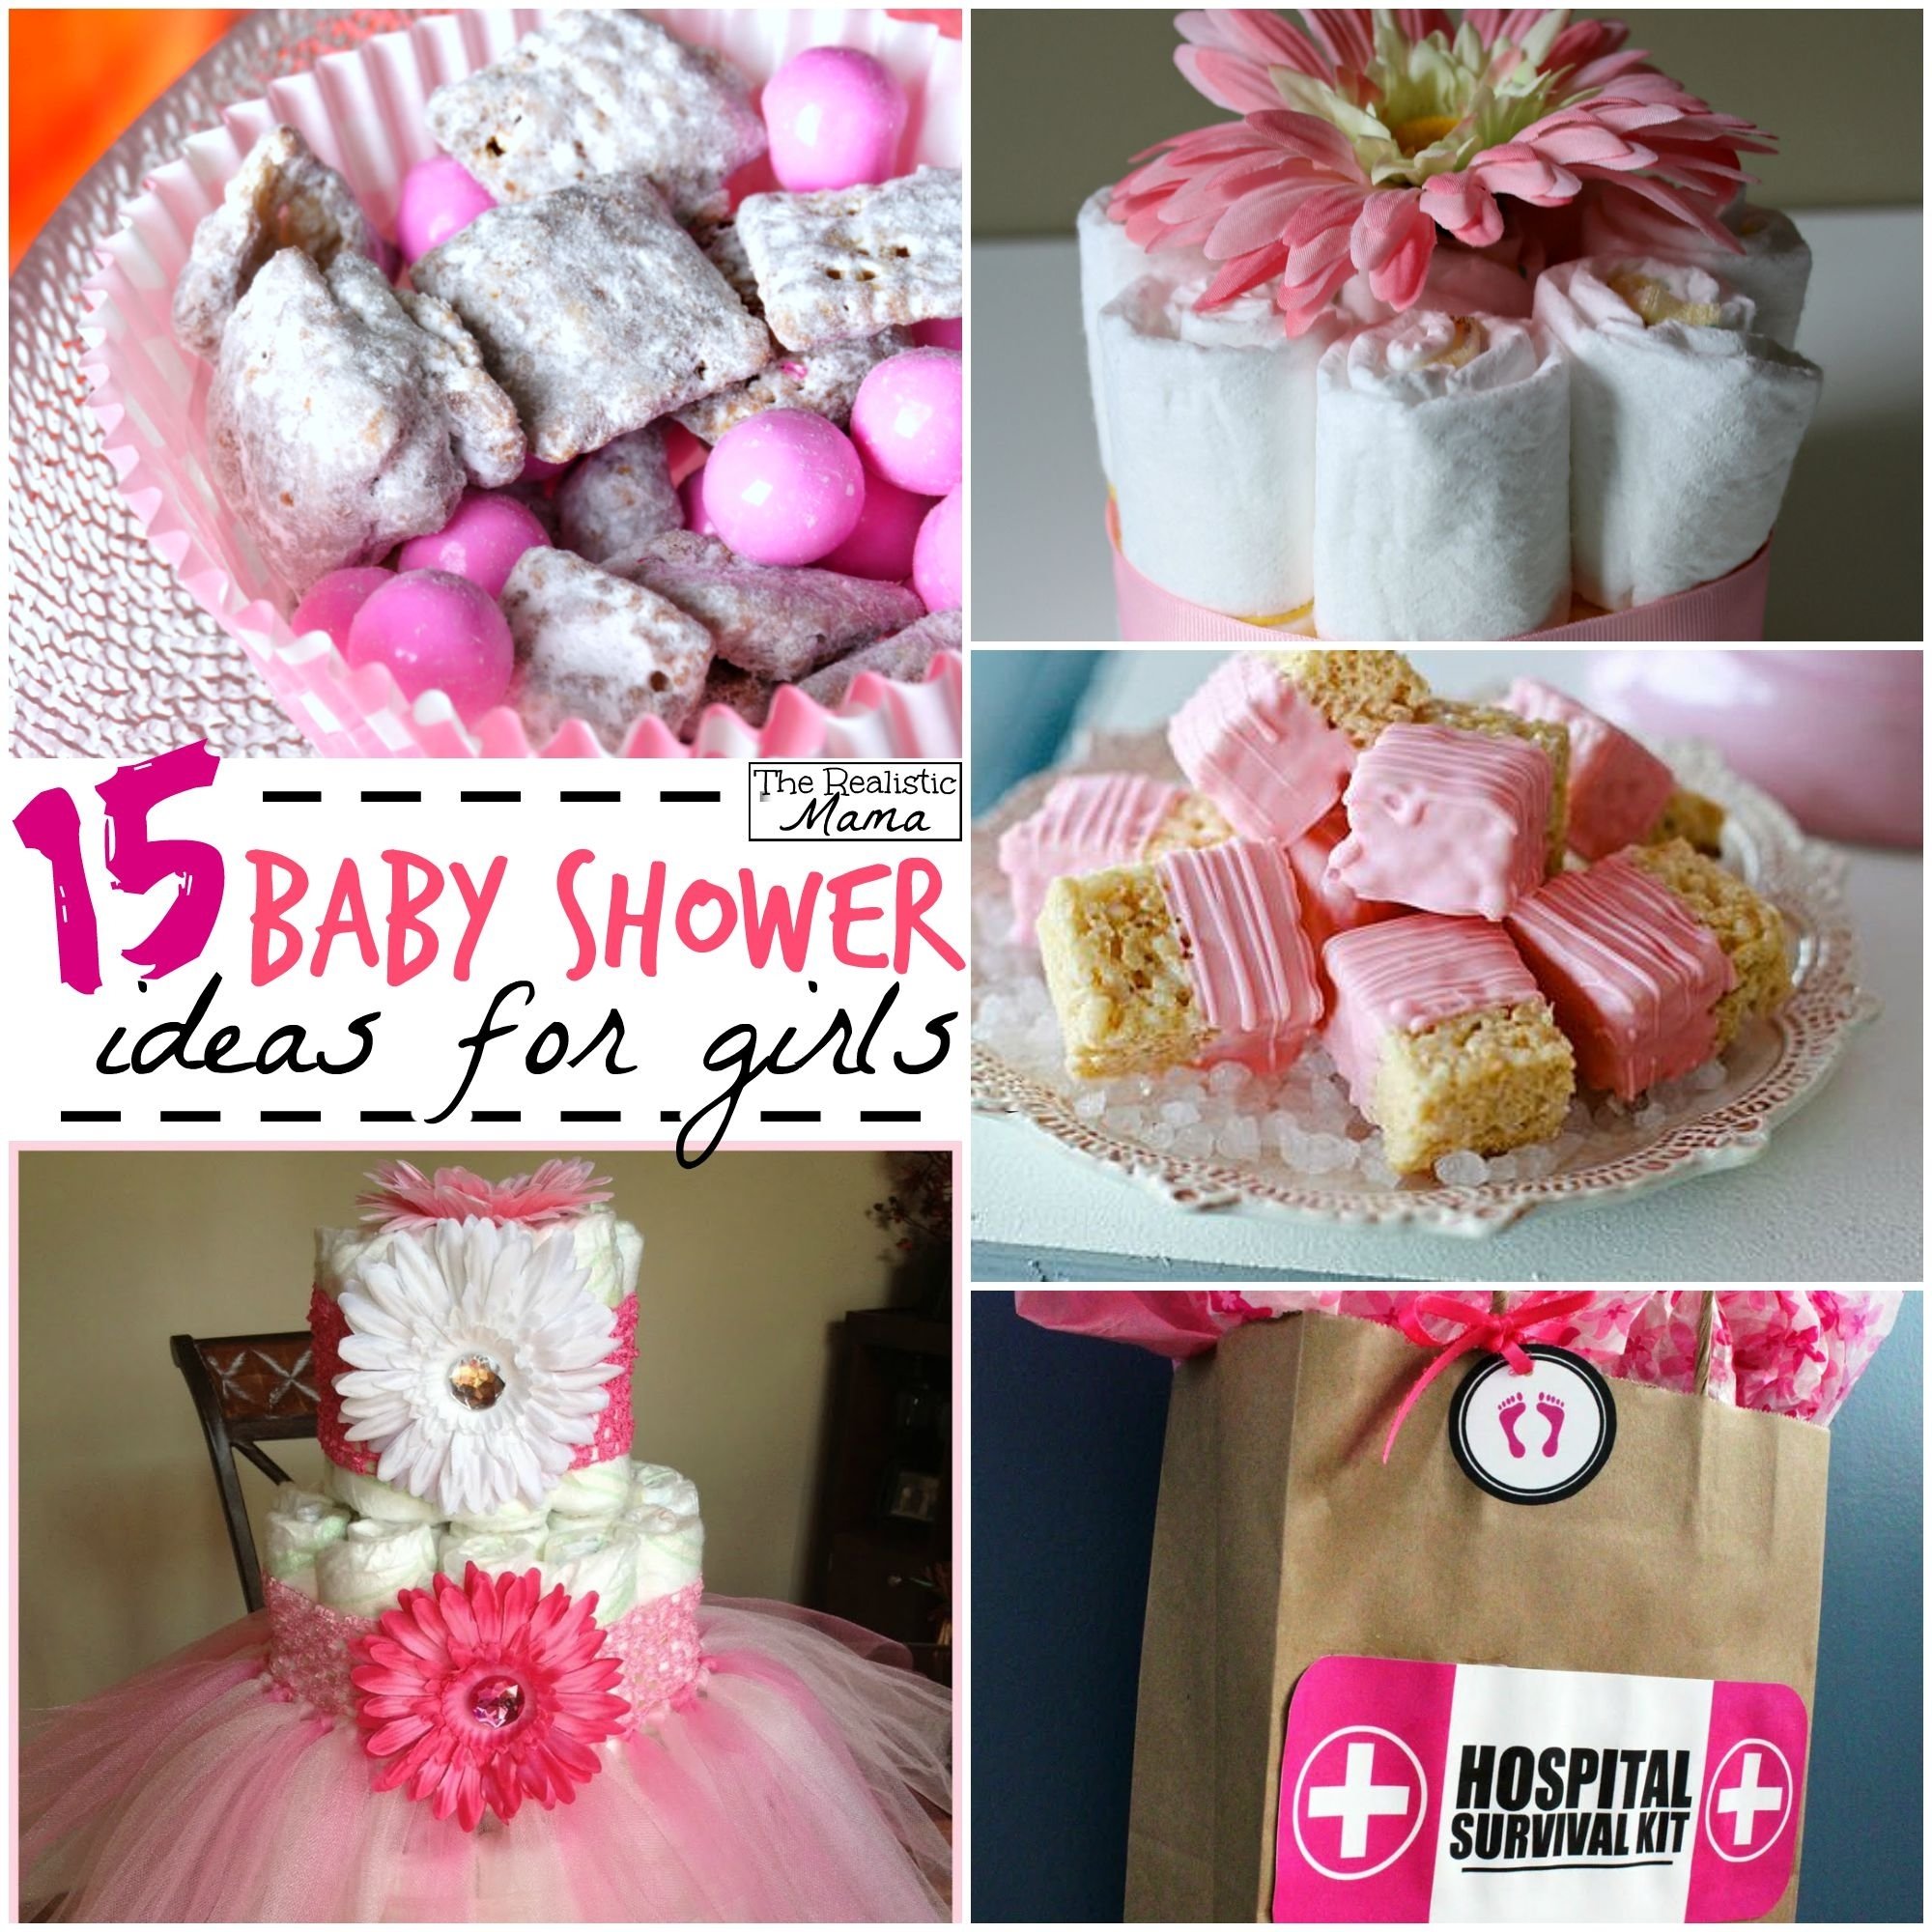 10 Elegant Cute Baby Girl Shower Ideas 15 baby shower ideas for girls the realistic mama 3 2023